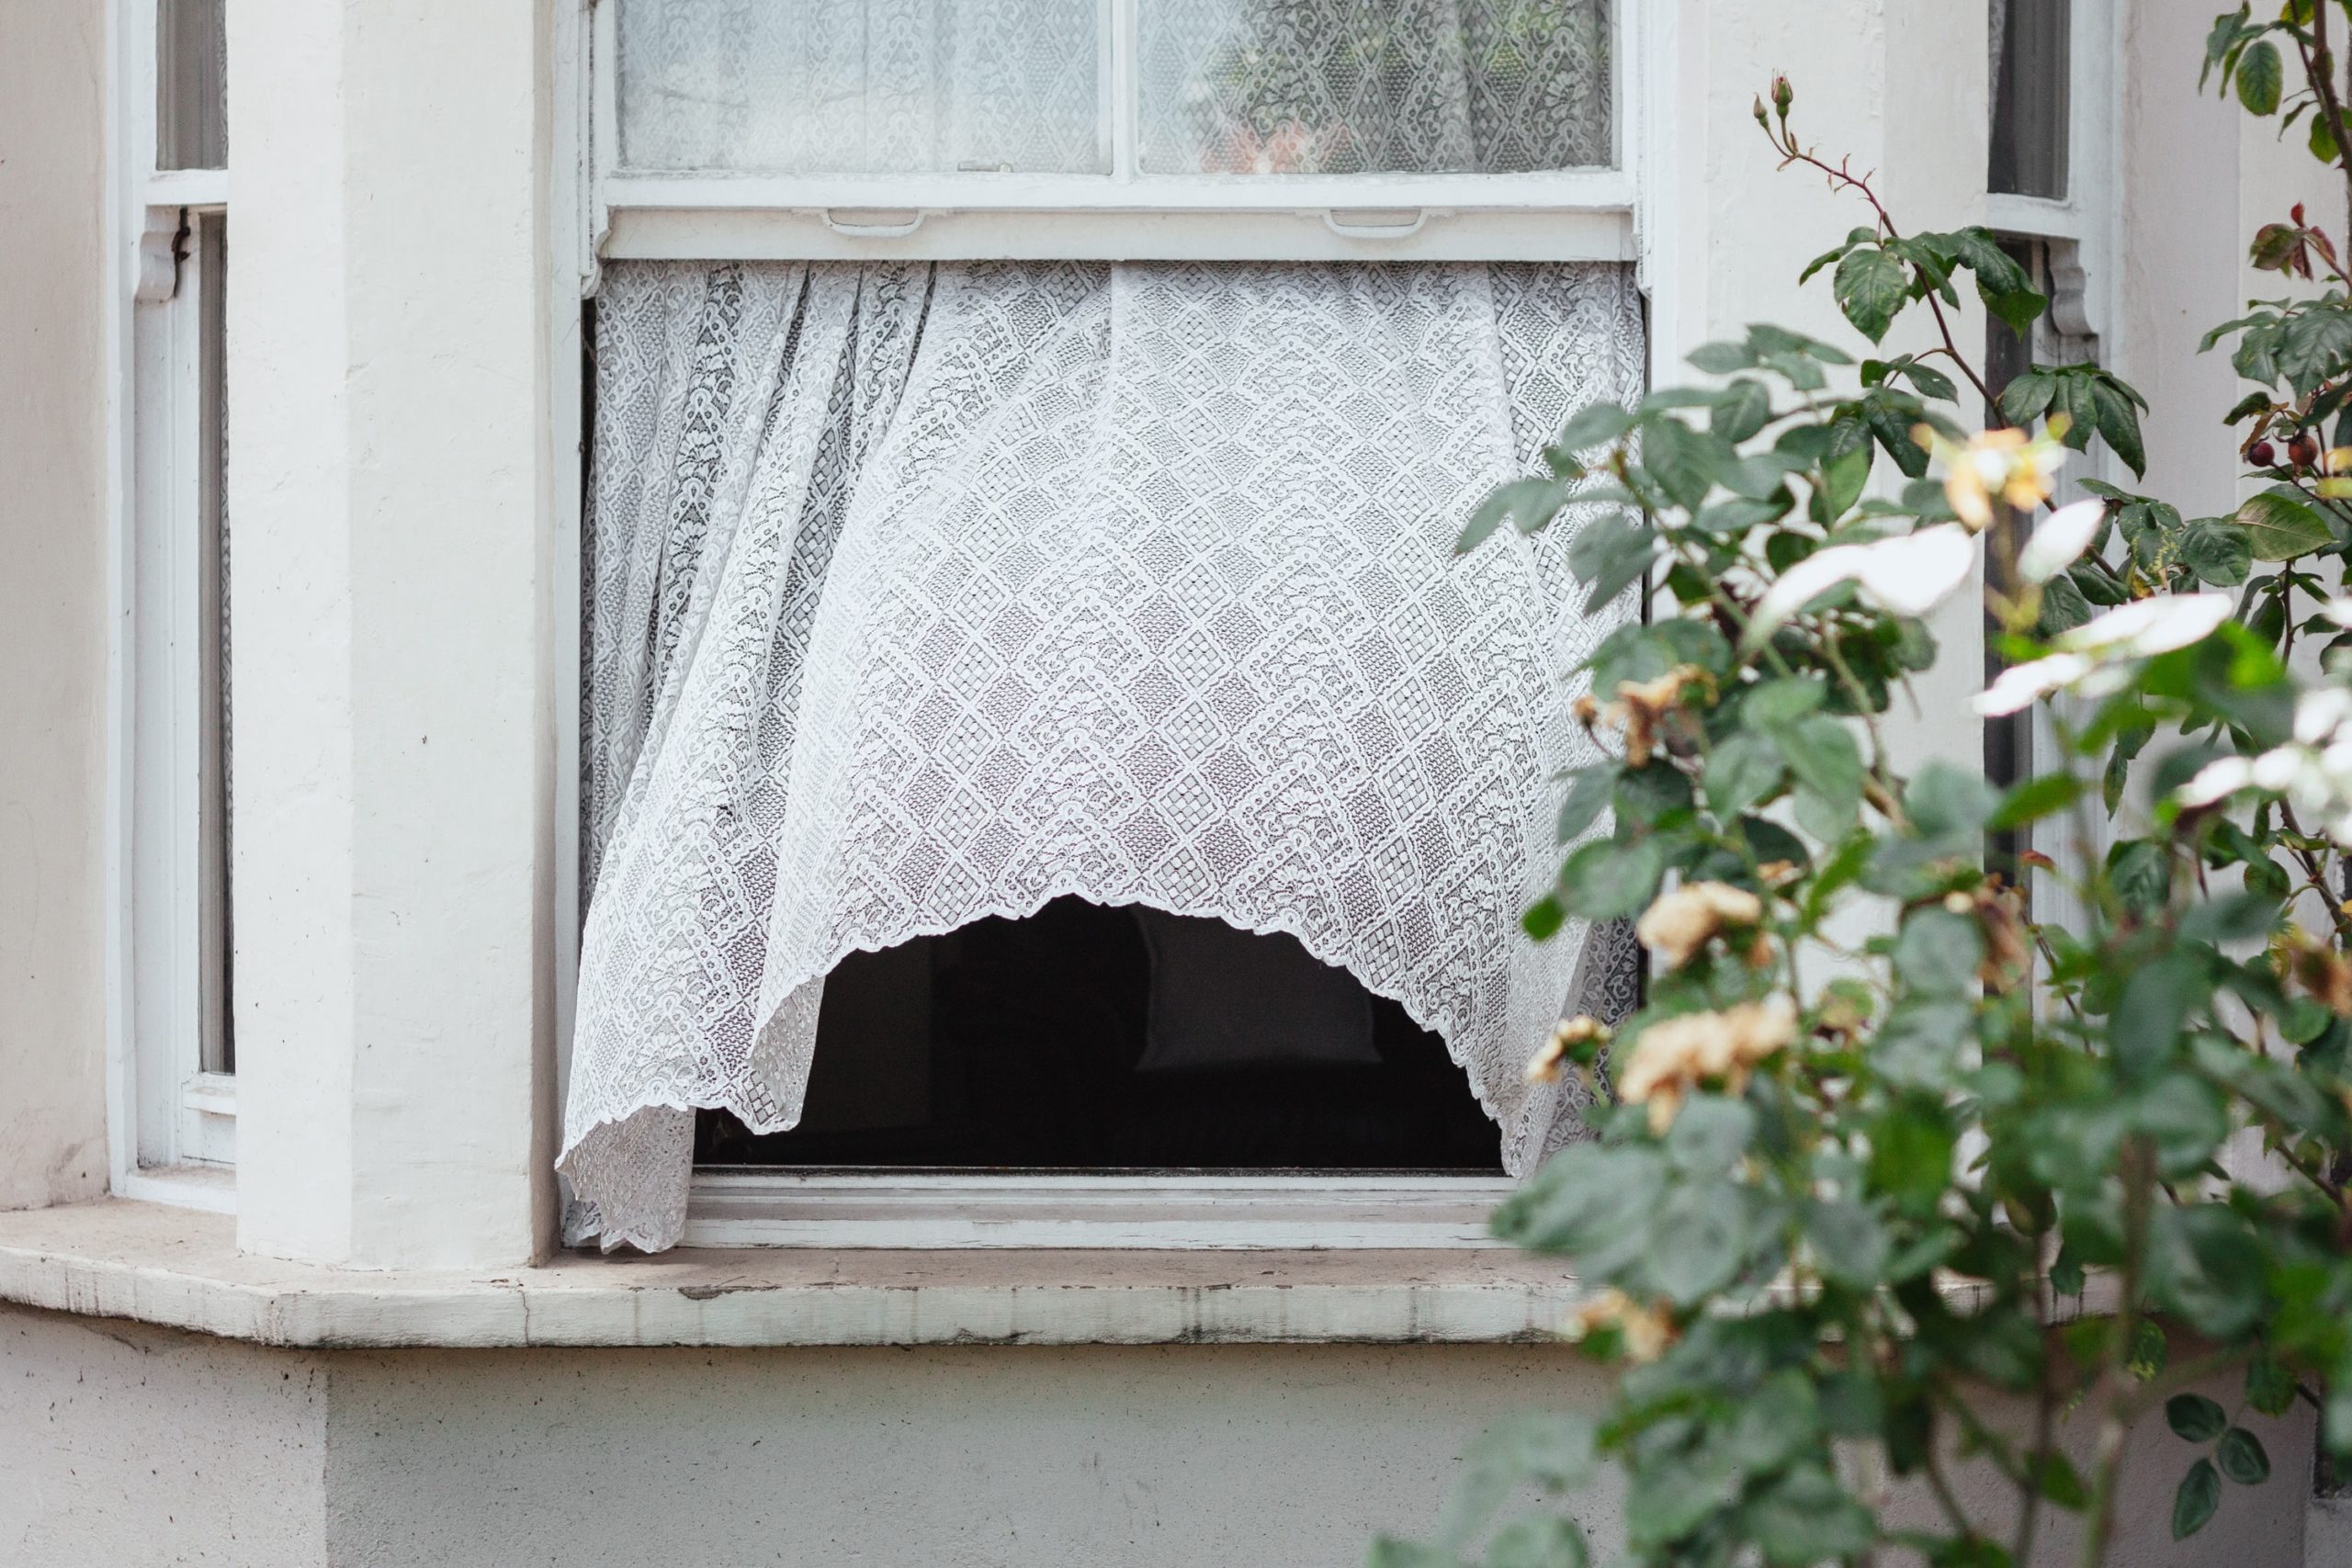 A window with white trim is open and a white, lace curtain is blowing in the wind.